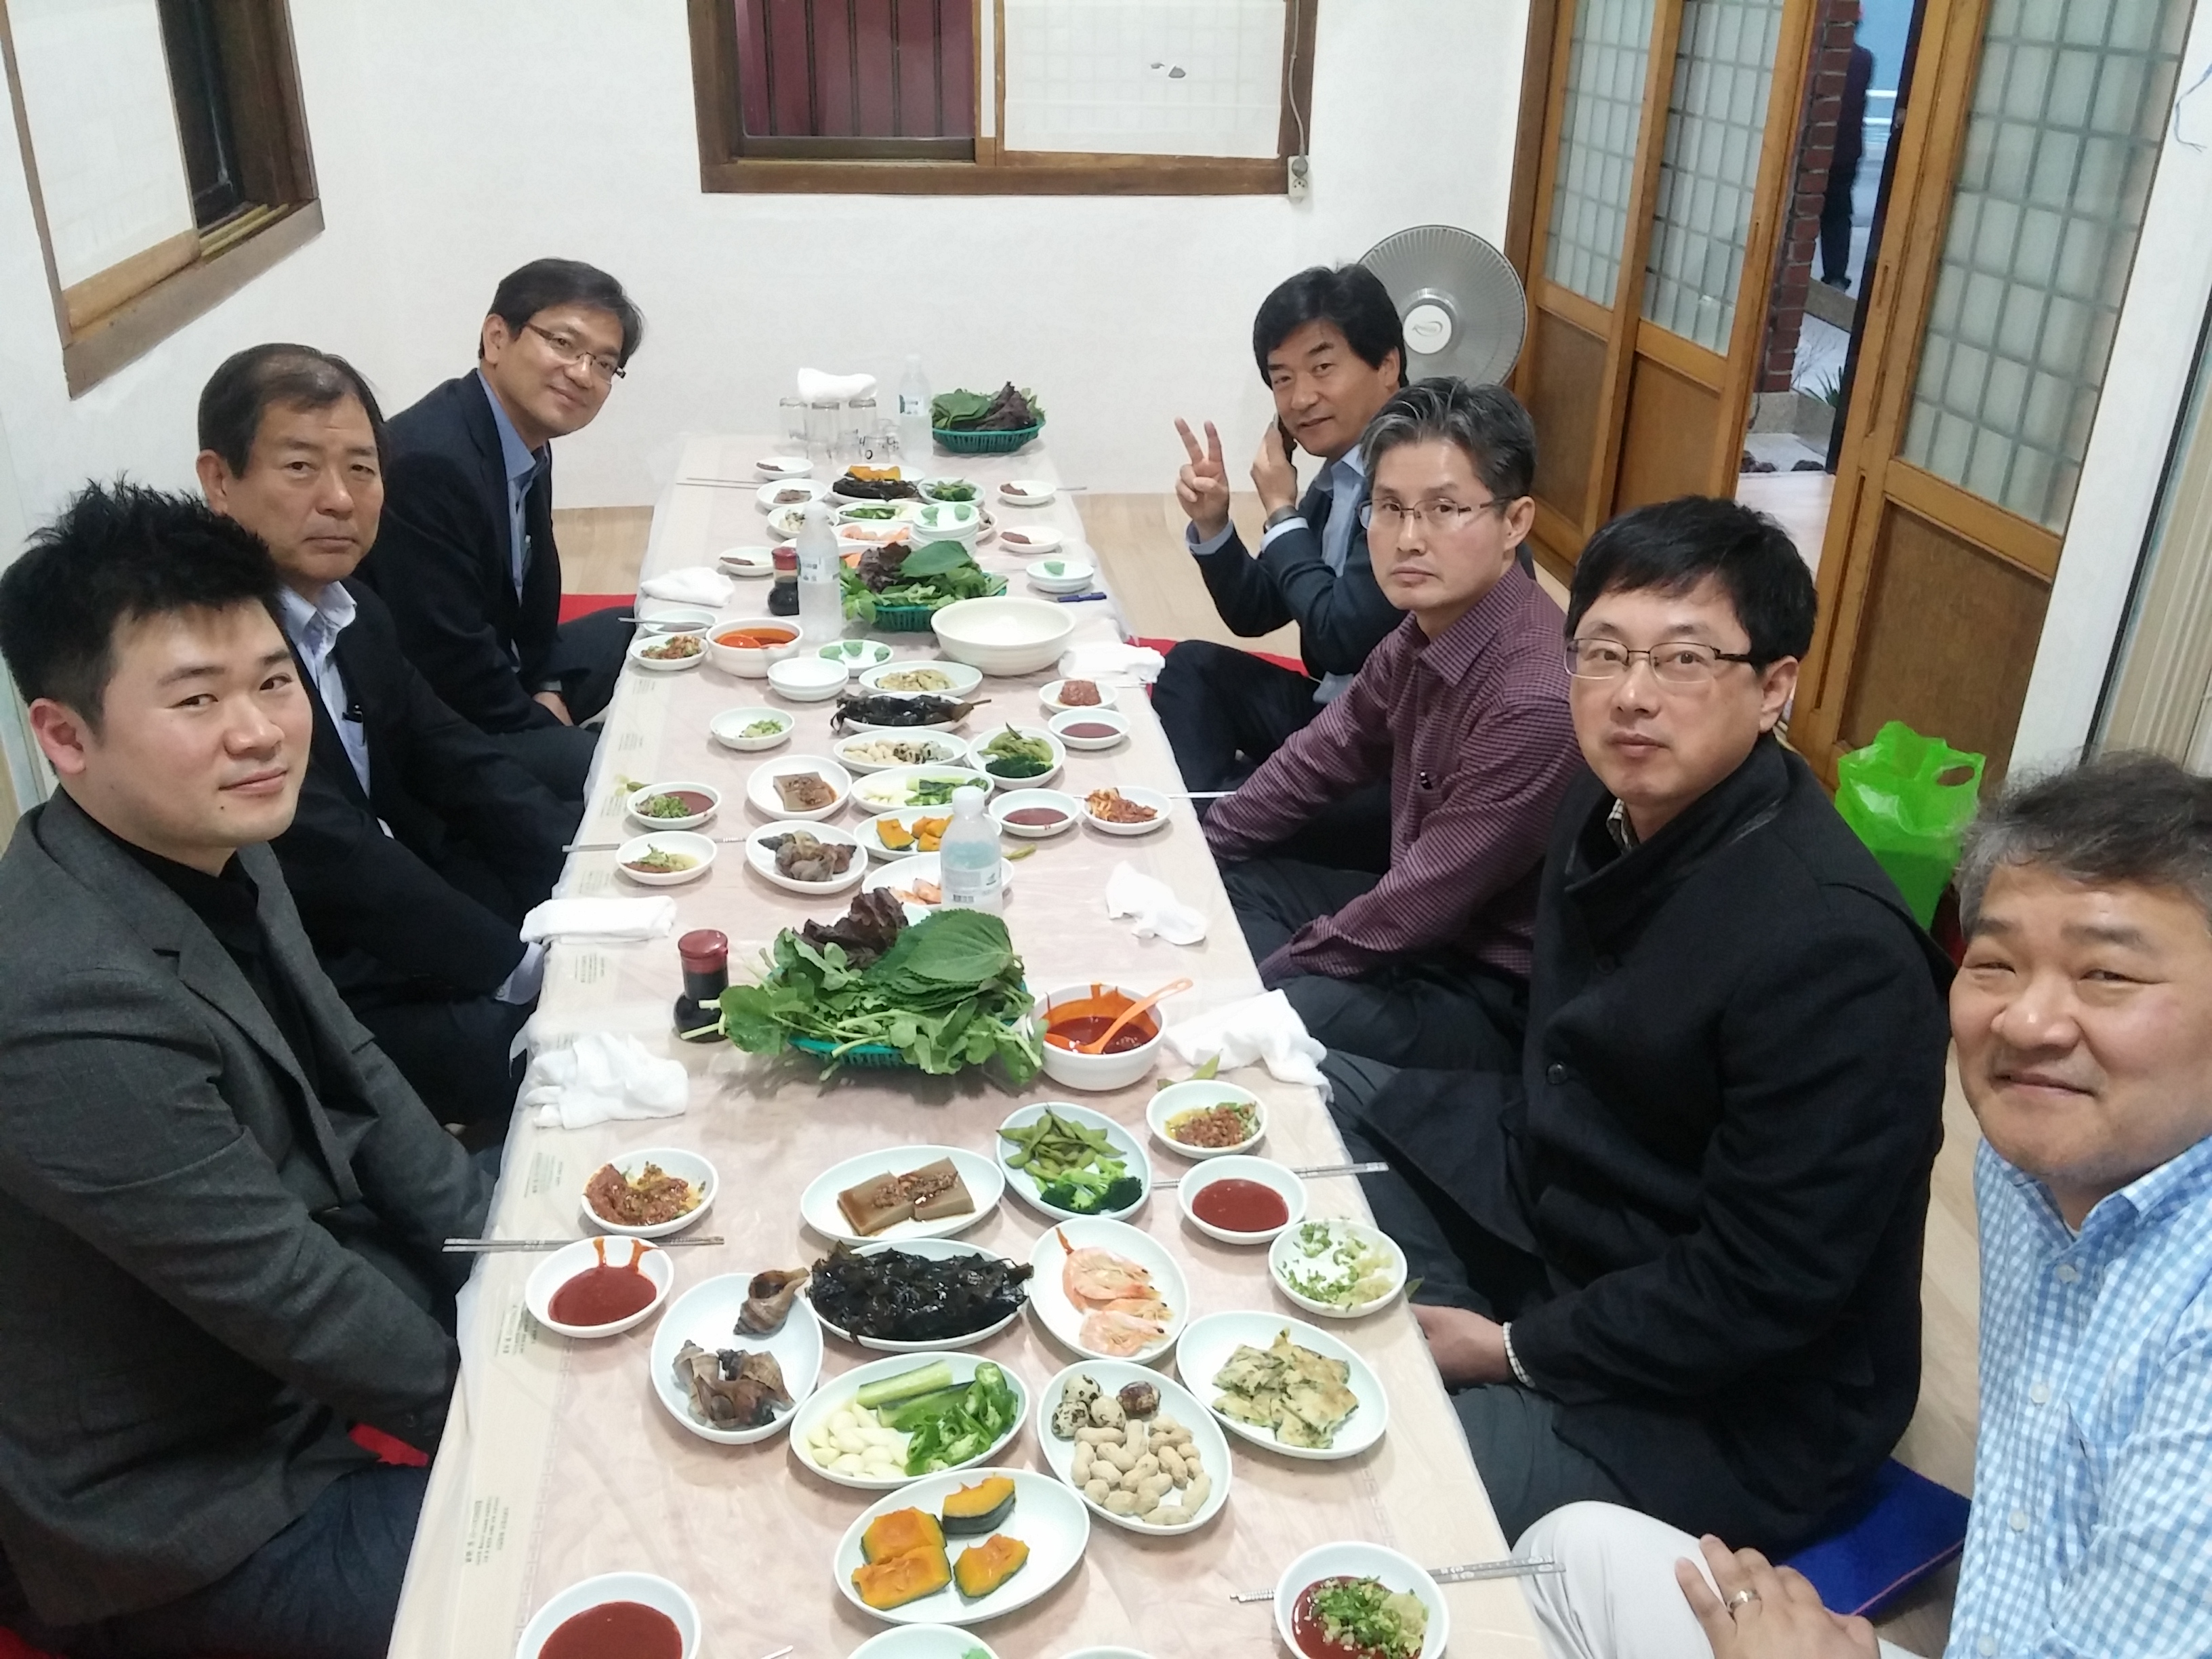 Welcome dinner for a new ME faculty member, Yeom 20160331_184006.jpg